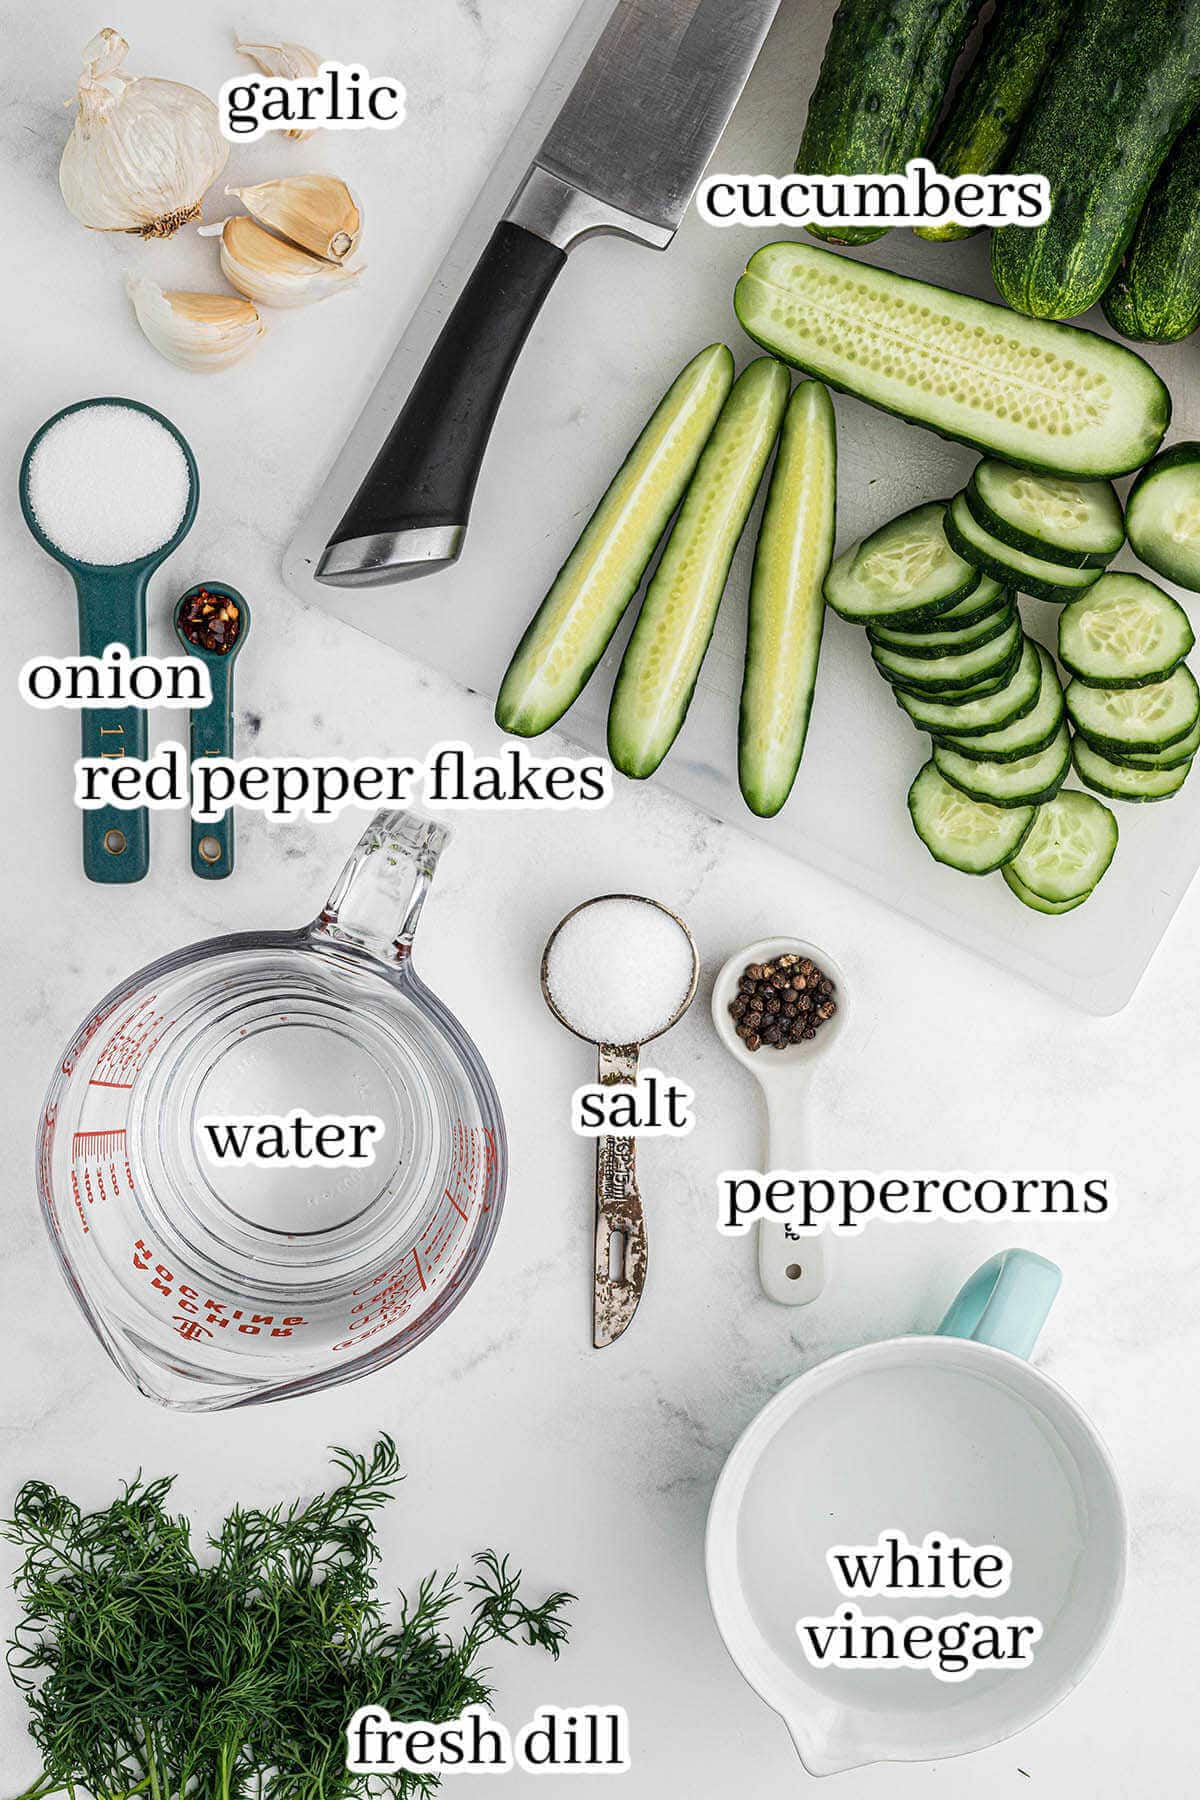 Ingredients to make recipes, with print overlay.